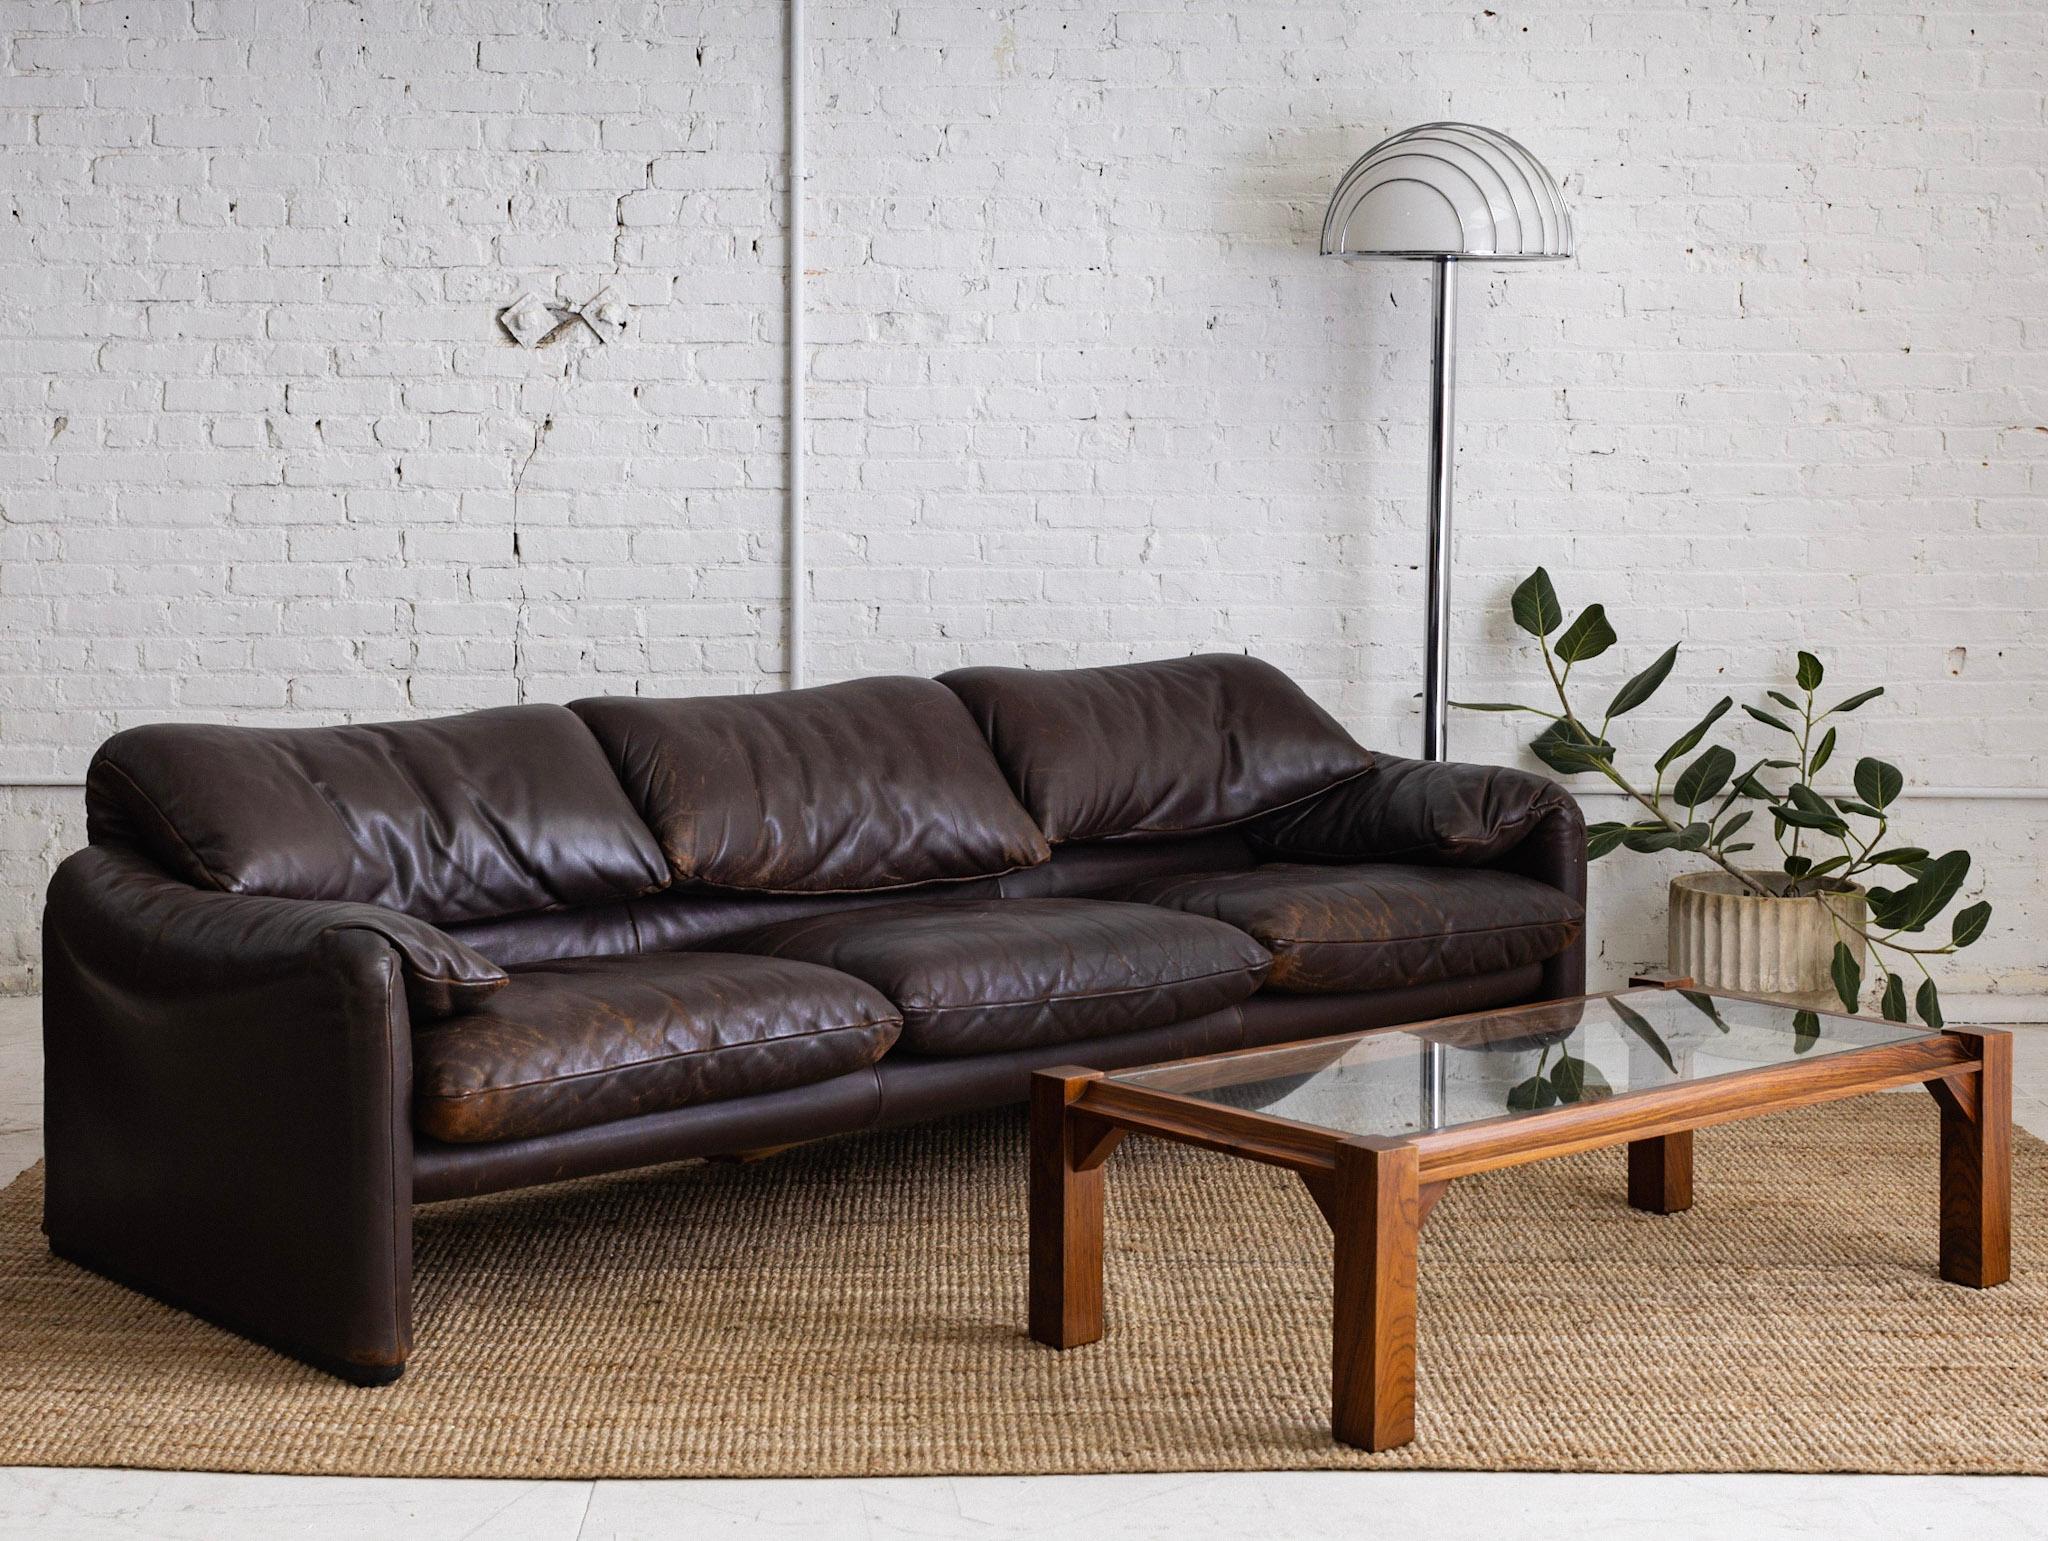 Maralunga 3 Seat Sofa by Vico Magistretti for Cassina in Chocolate Brown Leather 10